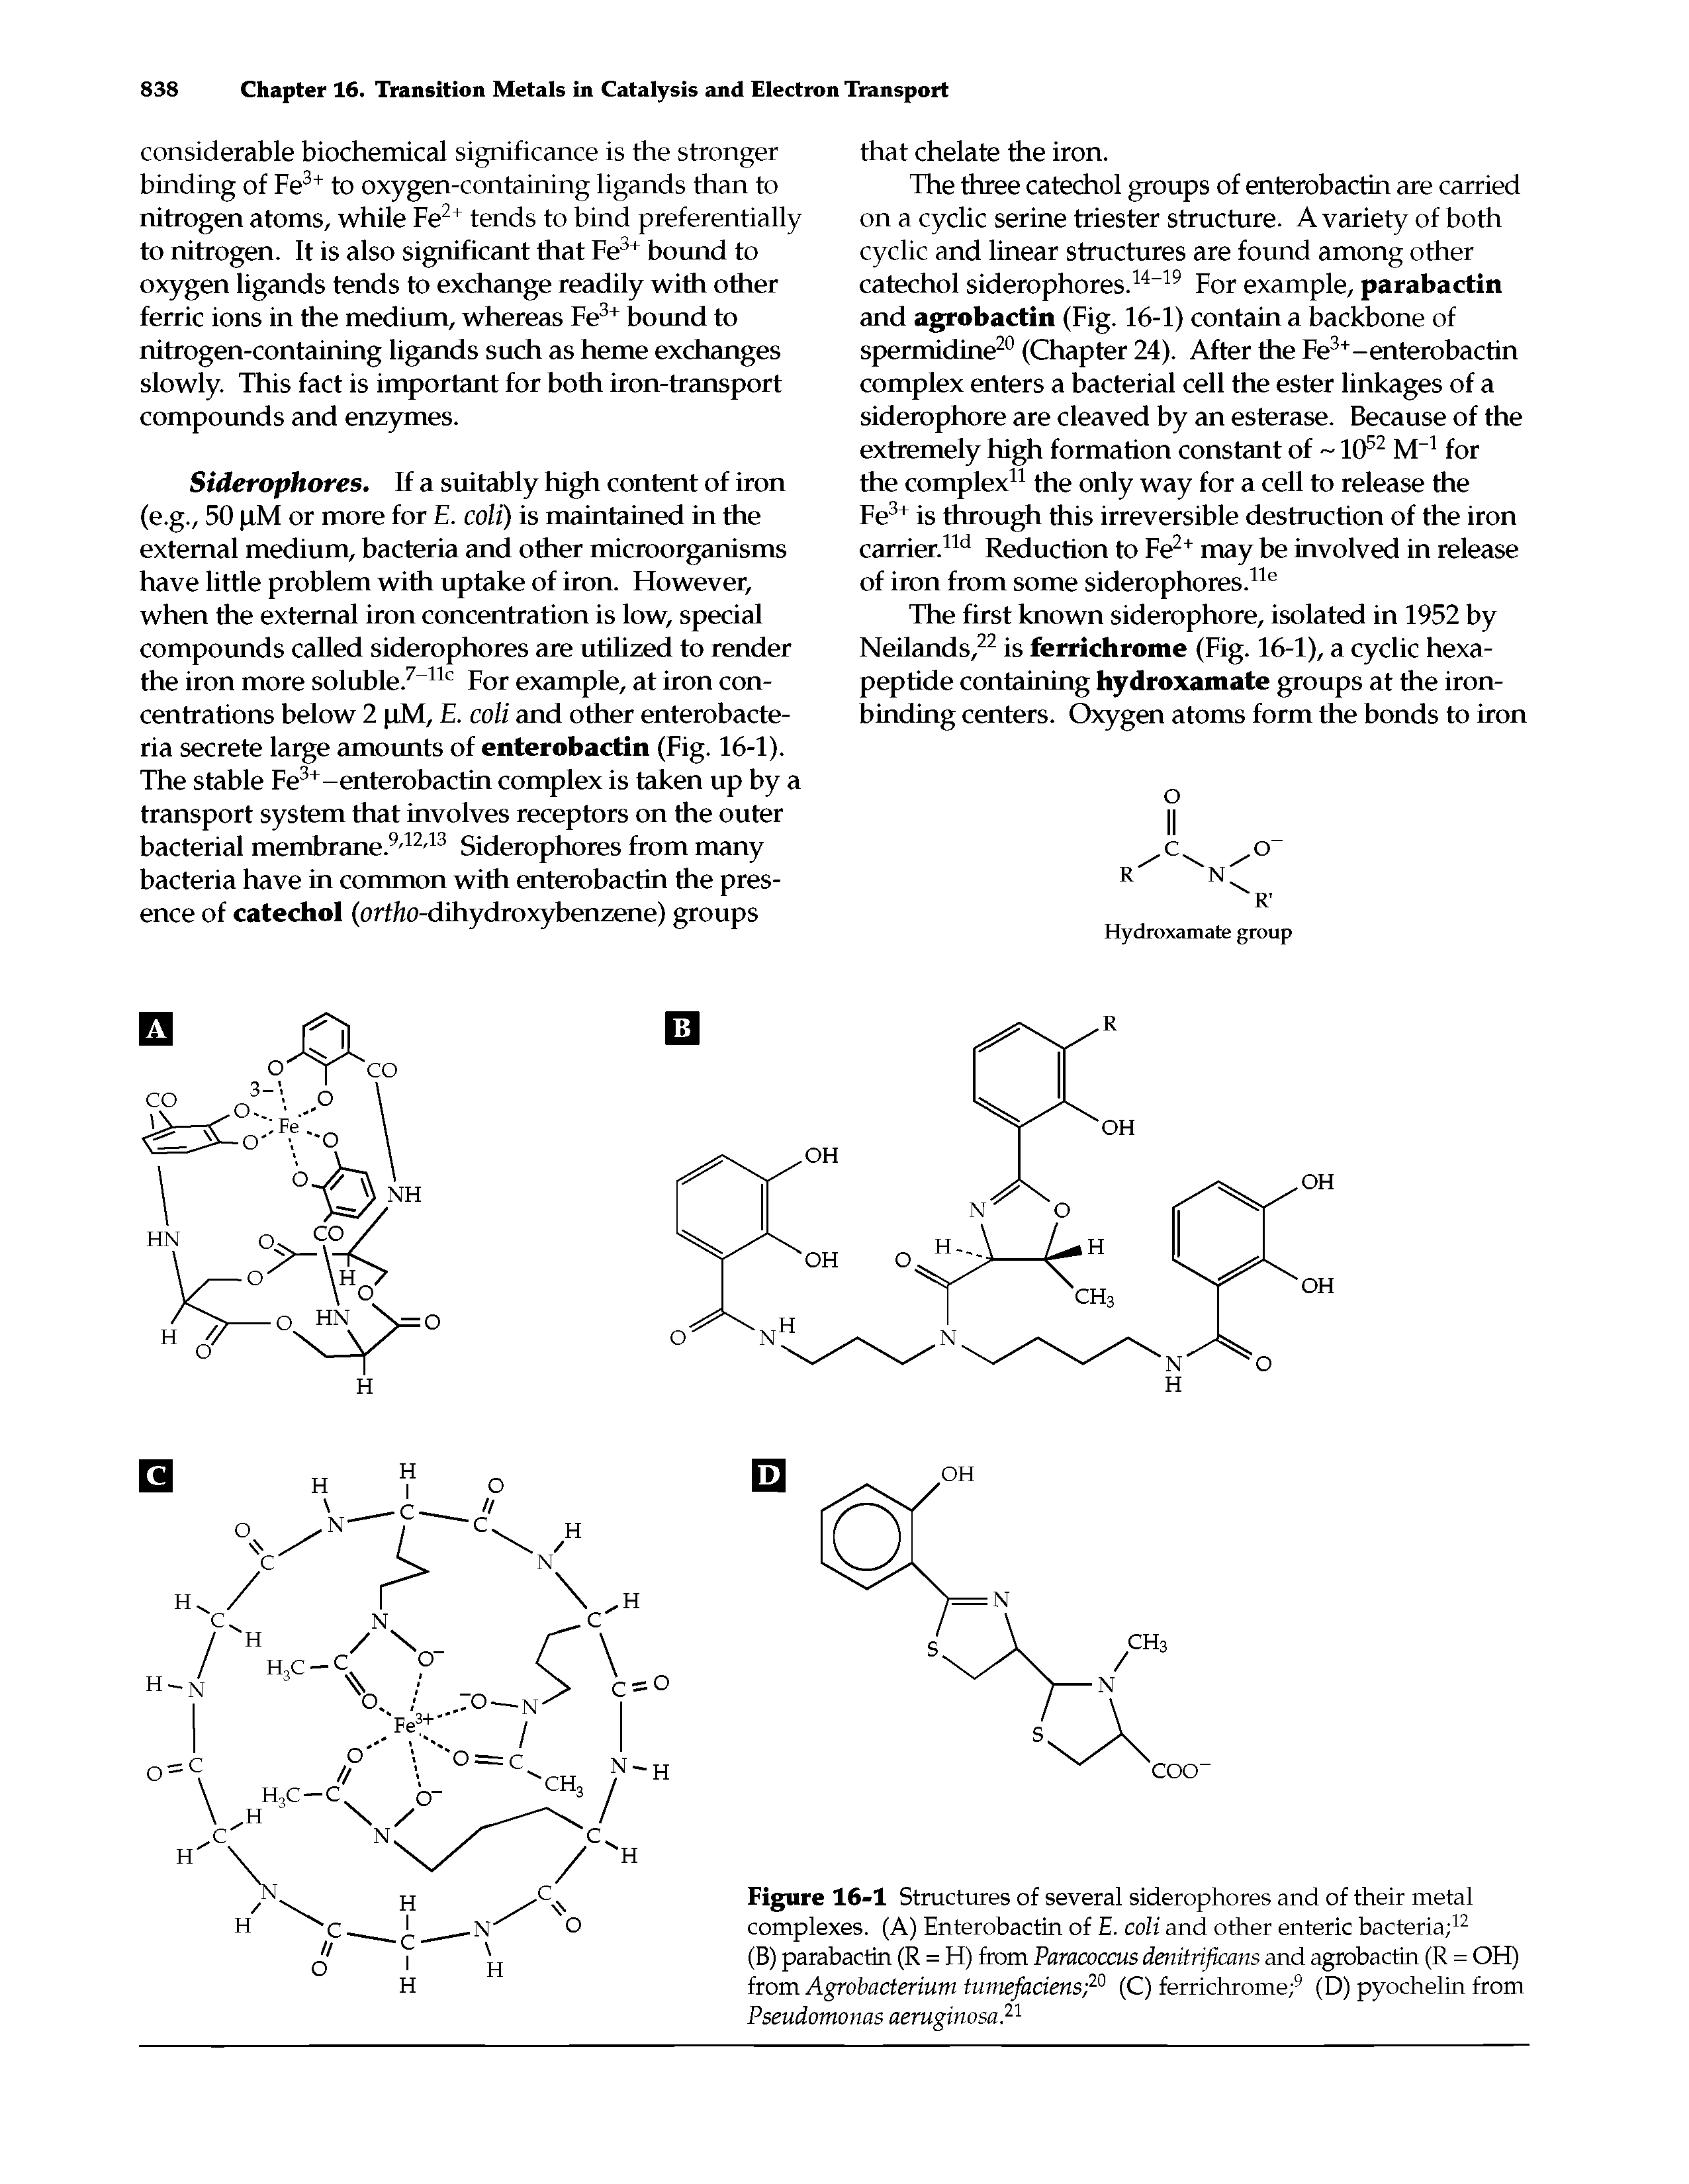 Figure 16-1 Structures of several siderophores and of their metal complexes. (A) Enterobactin of E. coli and other enteric bacteria ...